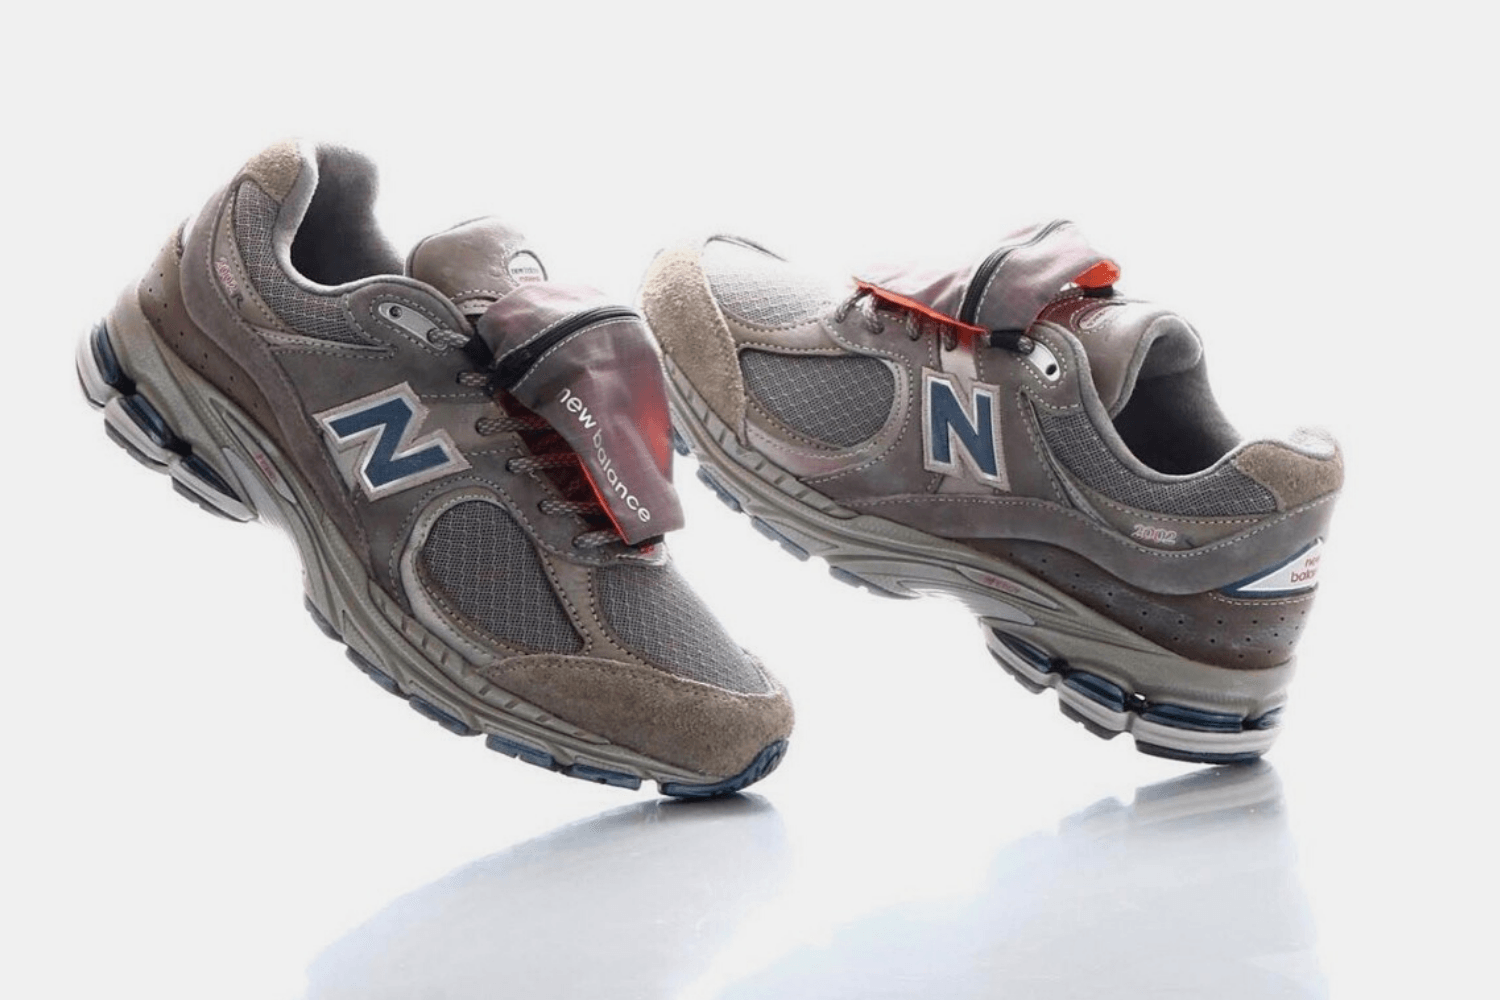 New Balance releases a new 2002Rs model